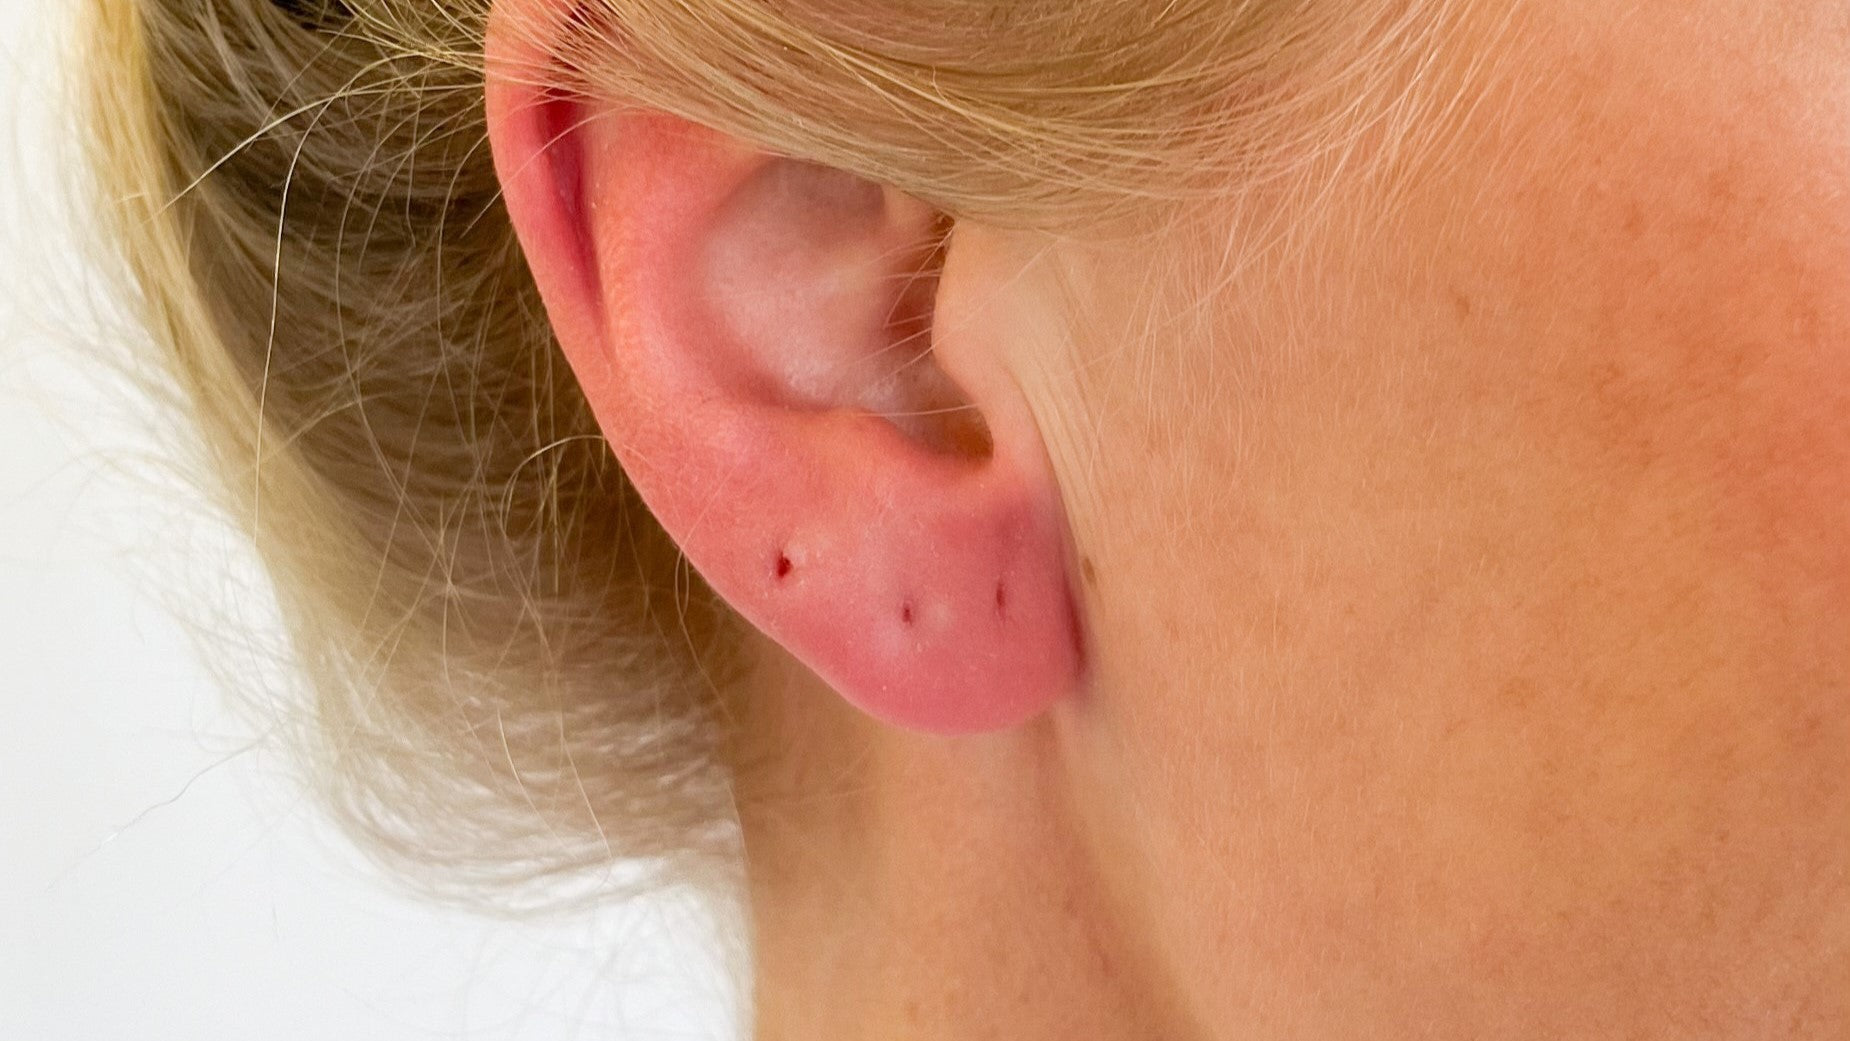 Ear Piercing for Kids: What to Know